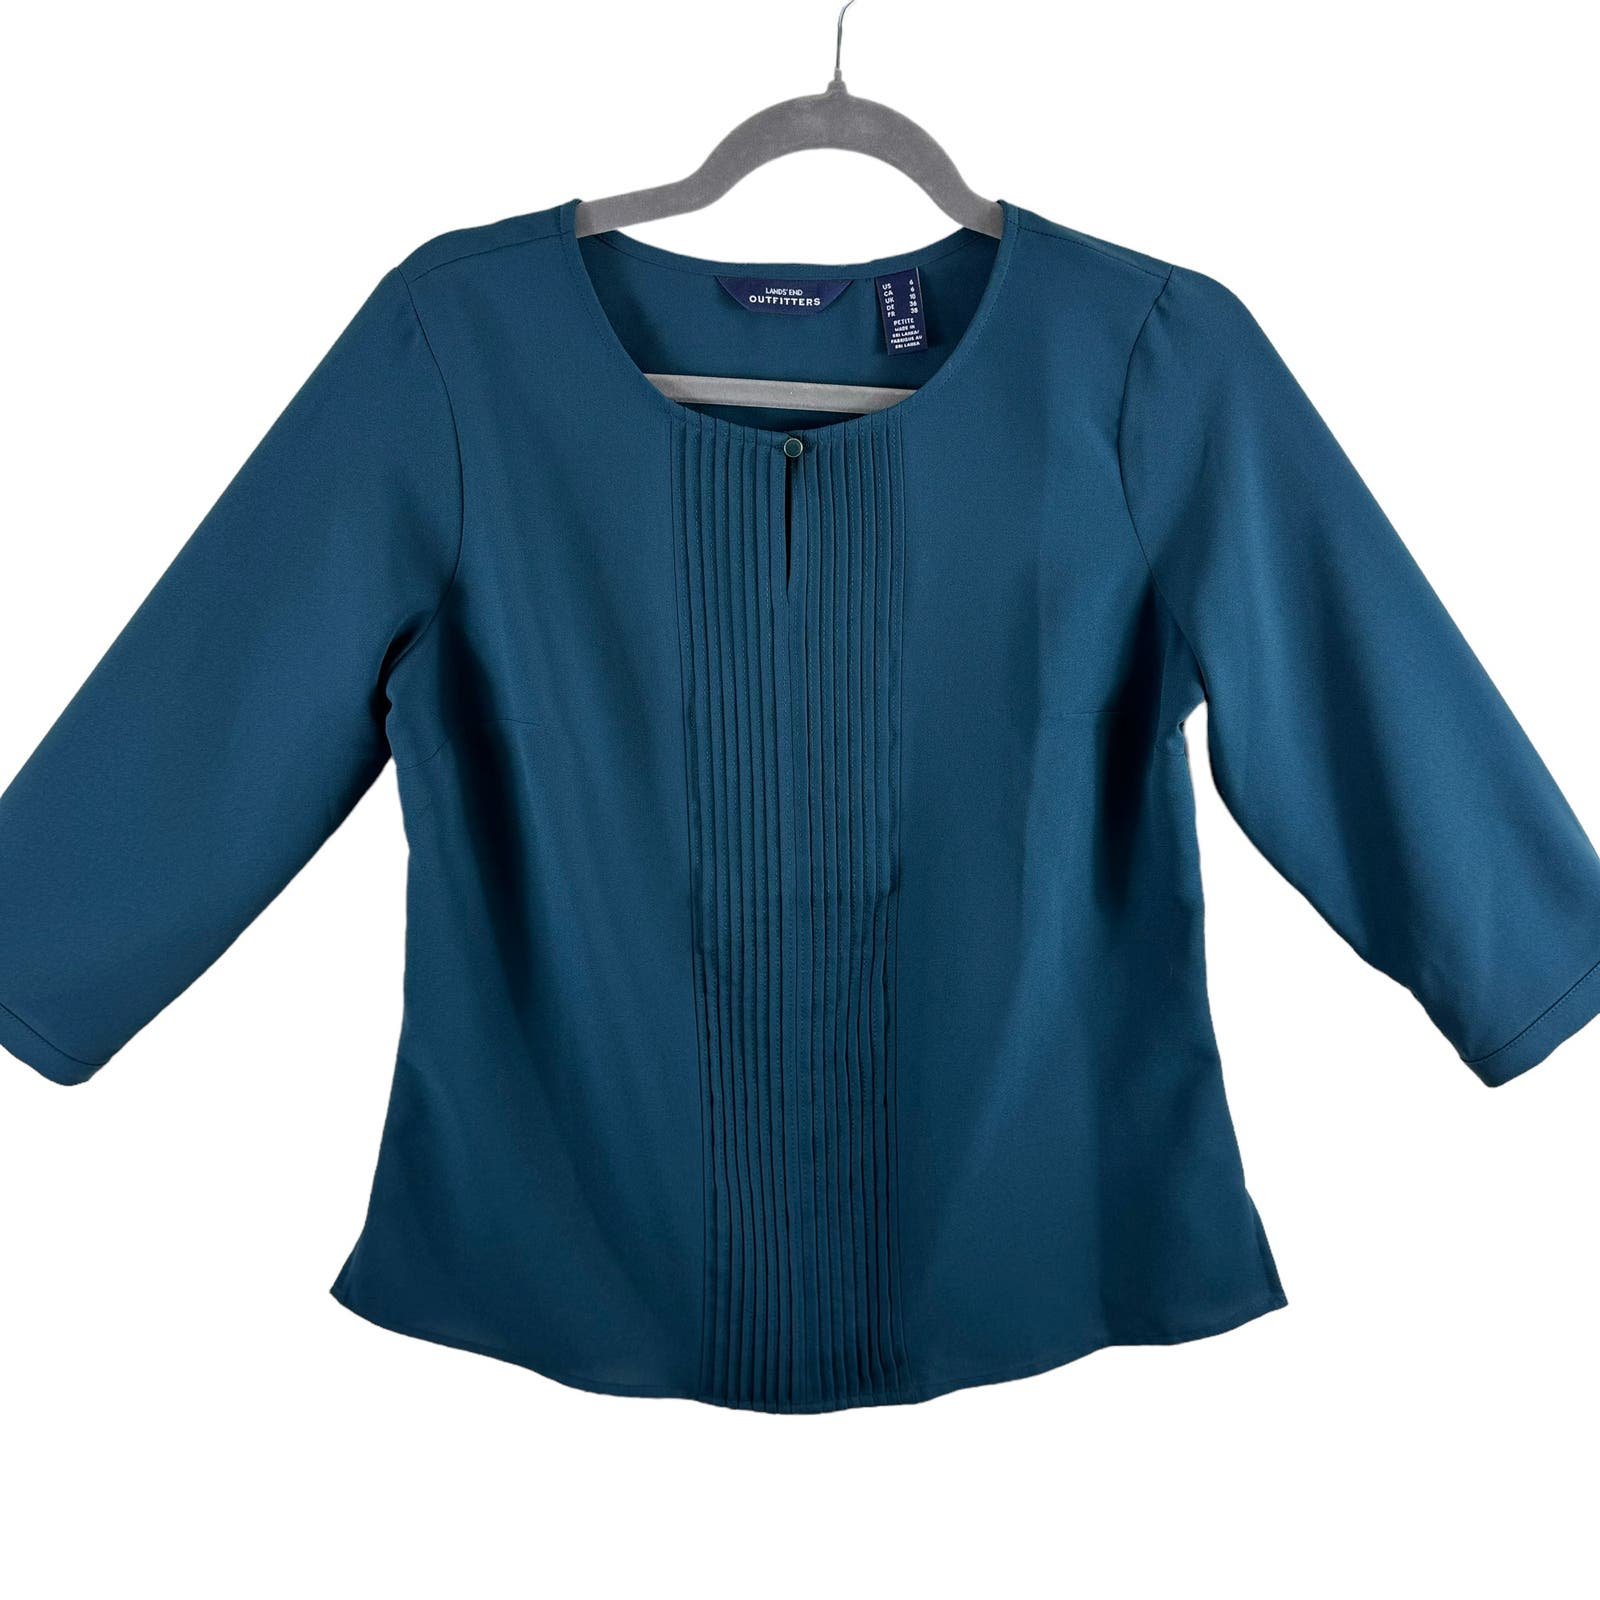 Stylish Lands´ End Outfitters Teal 3/4 Sleeve Roun